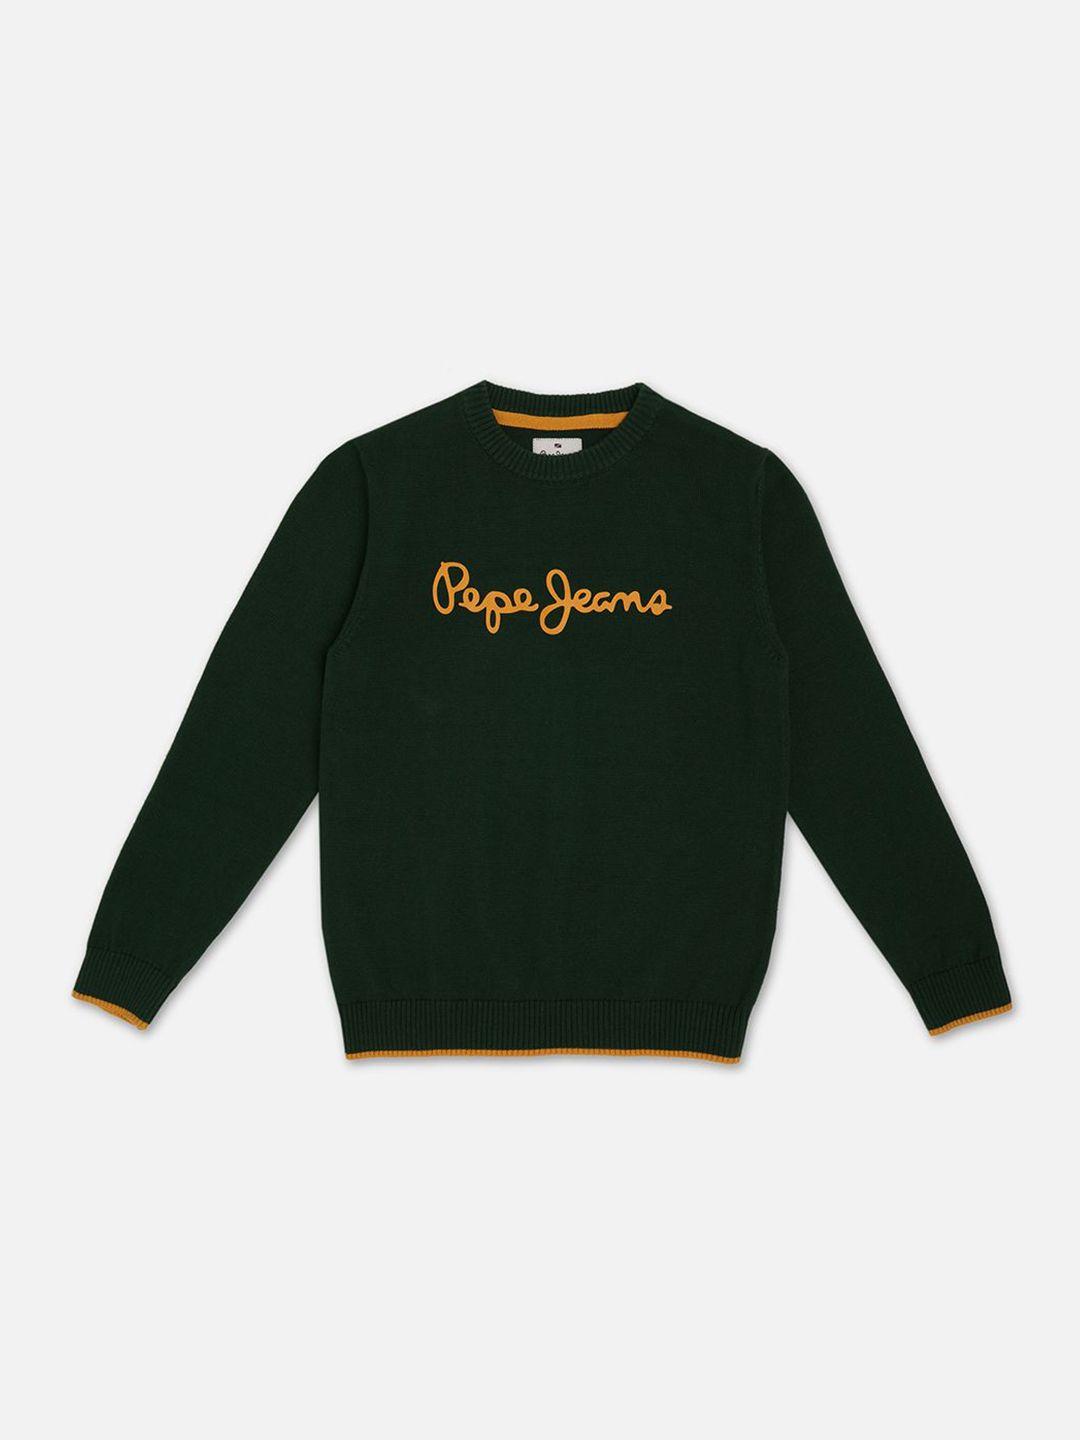 Pepe Jeans Boys Brand Logo Printed Round Neck Cotton Pullover Sweater